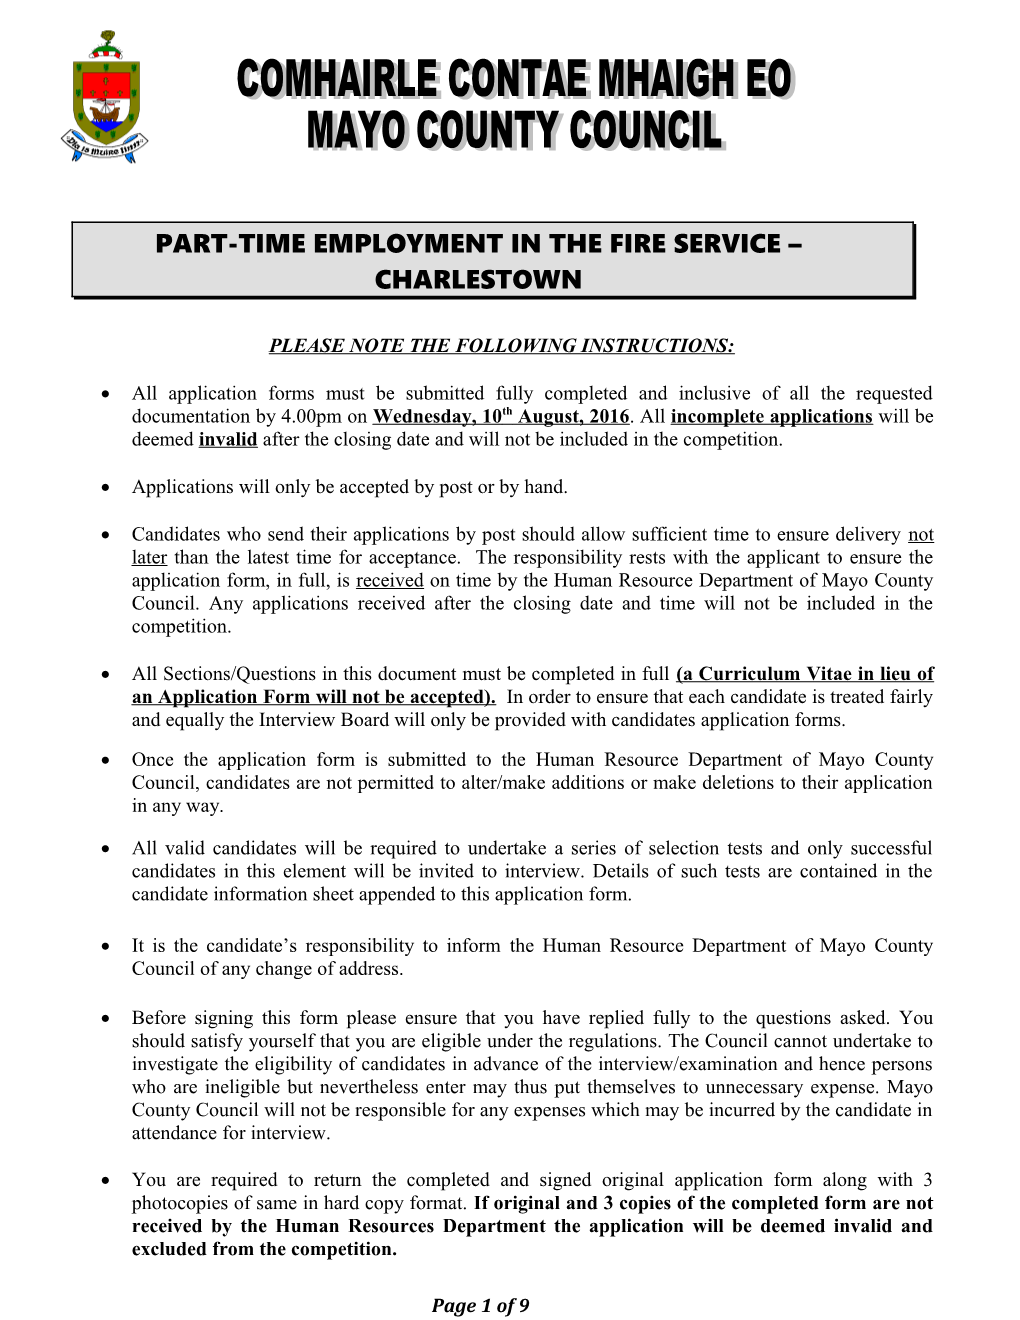 Part-Time Employment in the Fire Service Charlestown